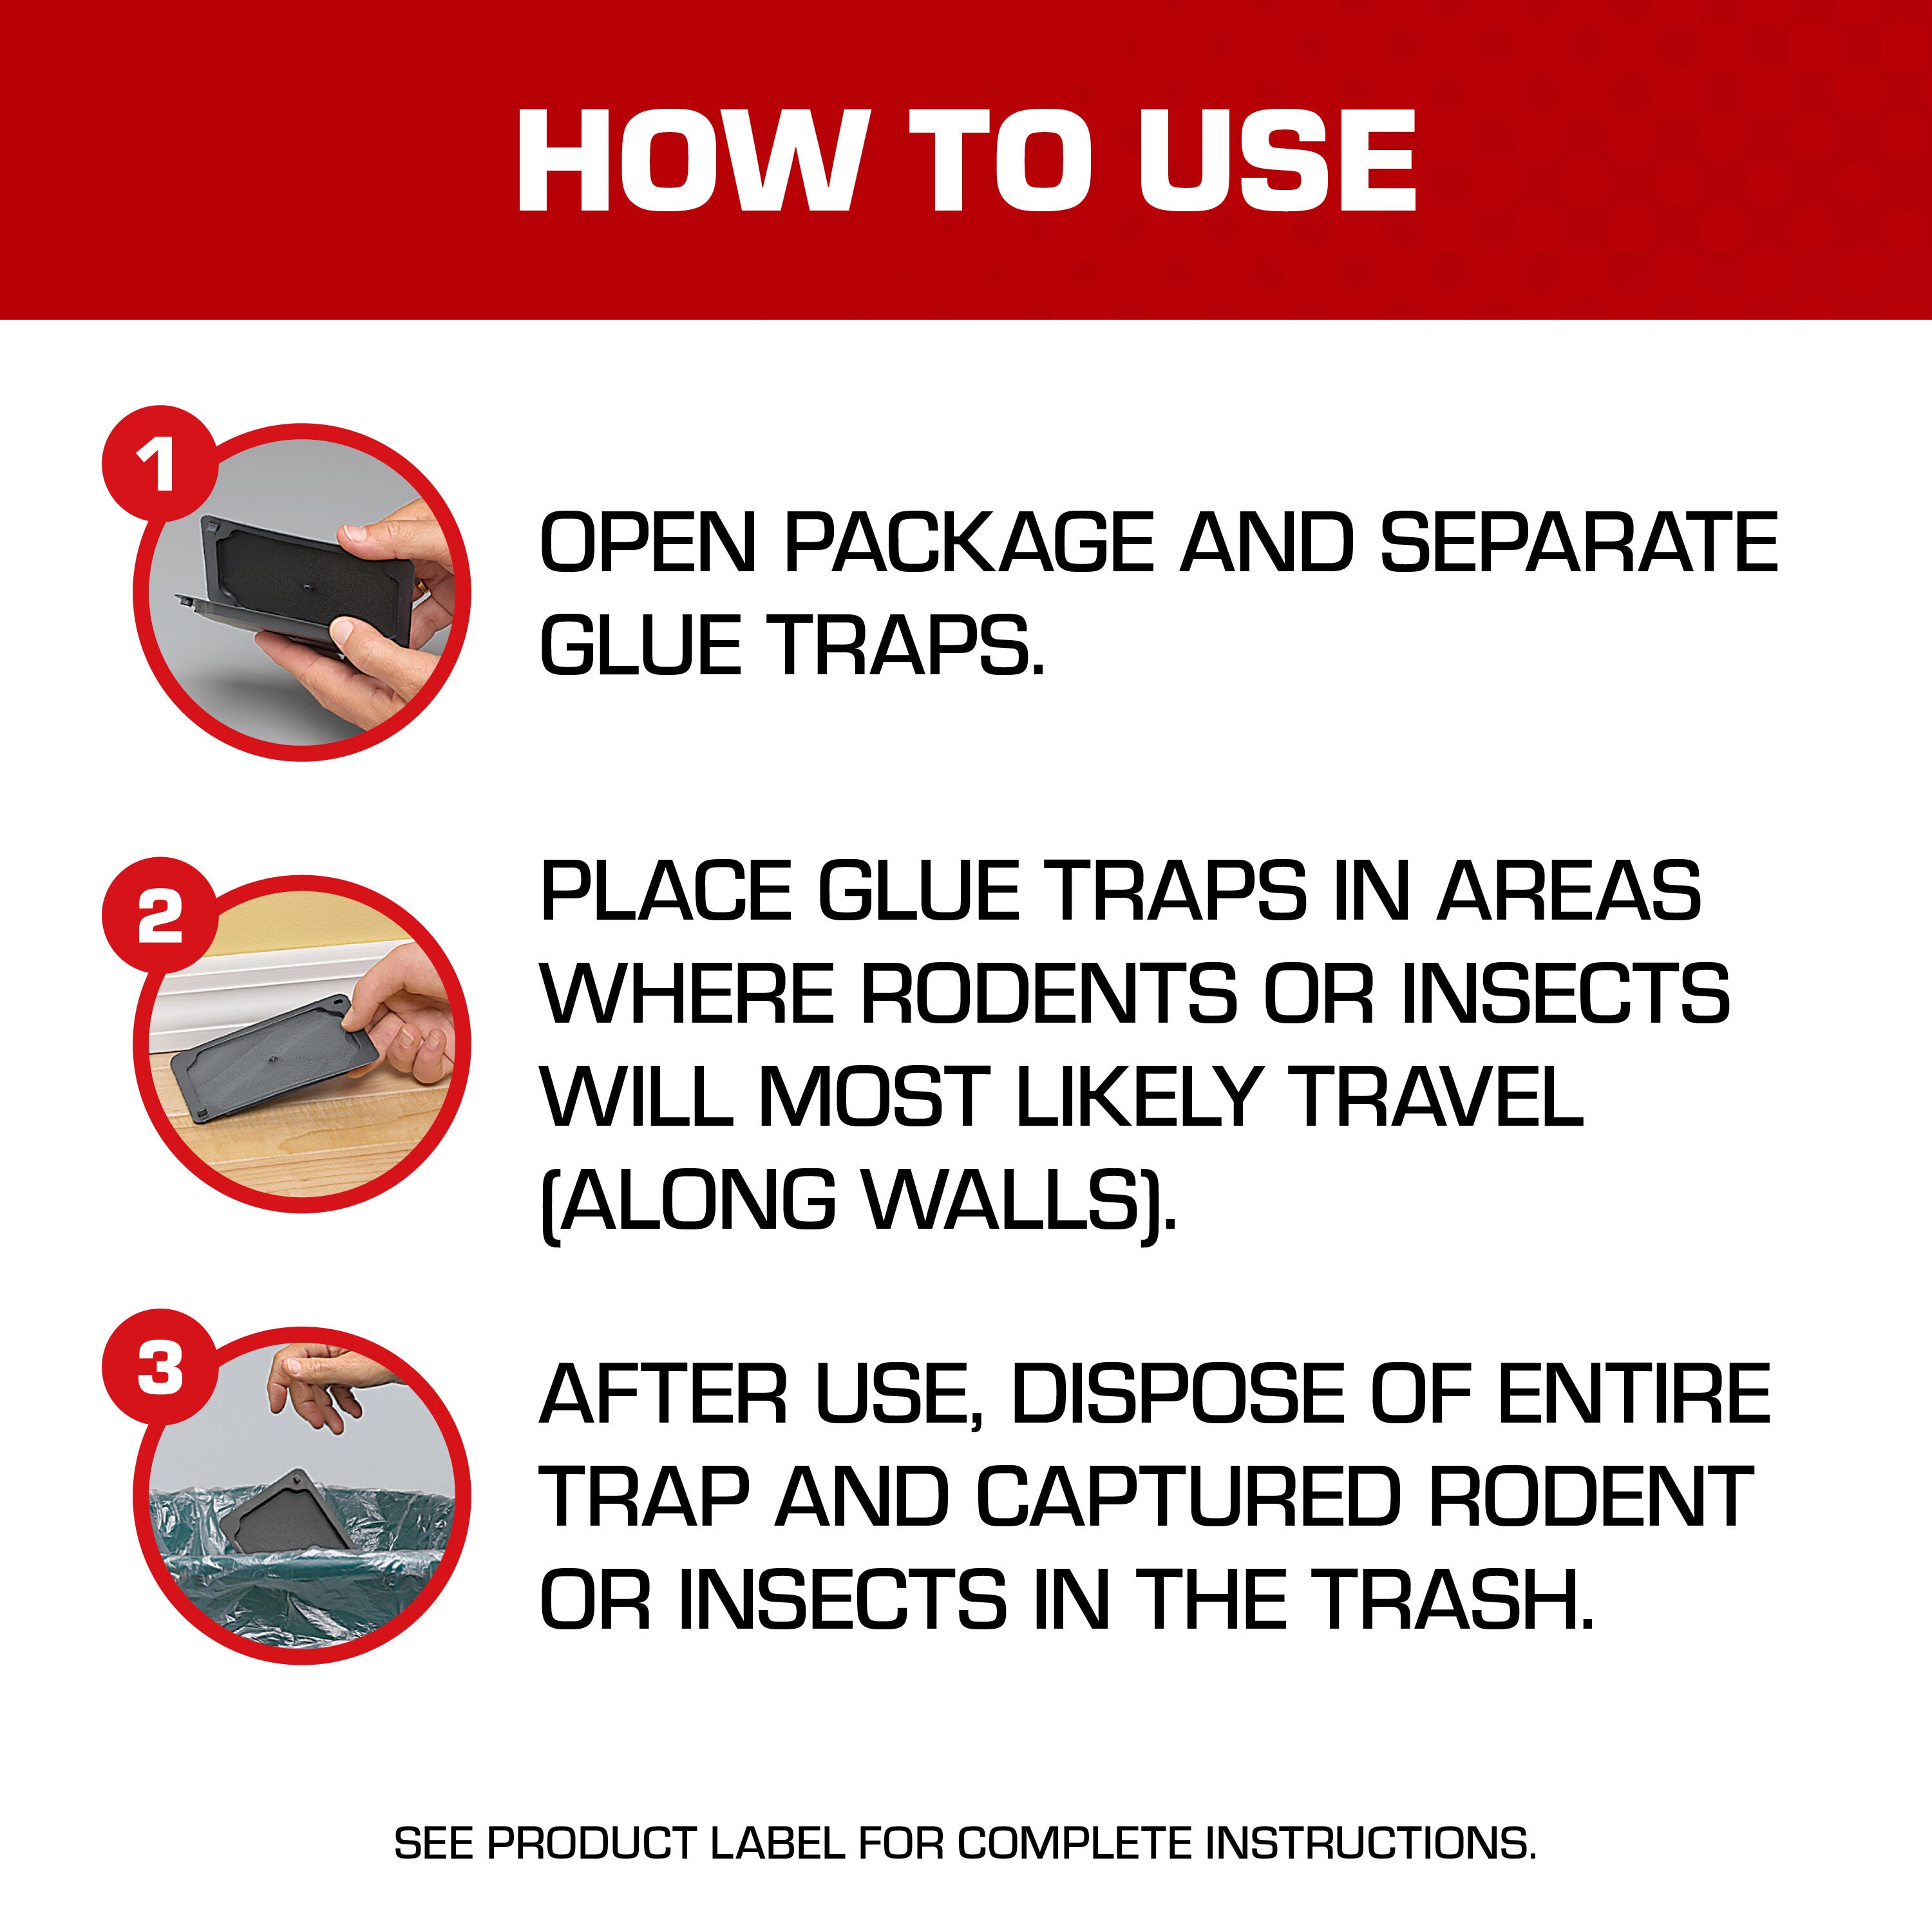 Tomcat Ready to Use Glue Sticky Mouse Traps ~ 4 Pack ~ 16 Traps Total ~ New